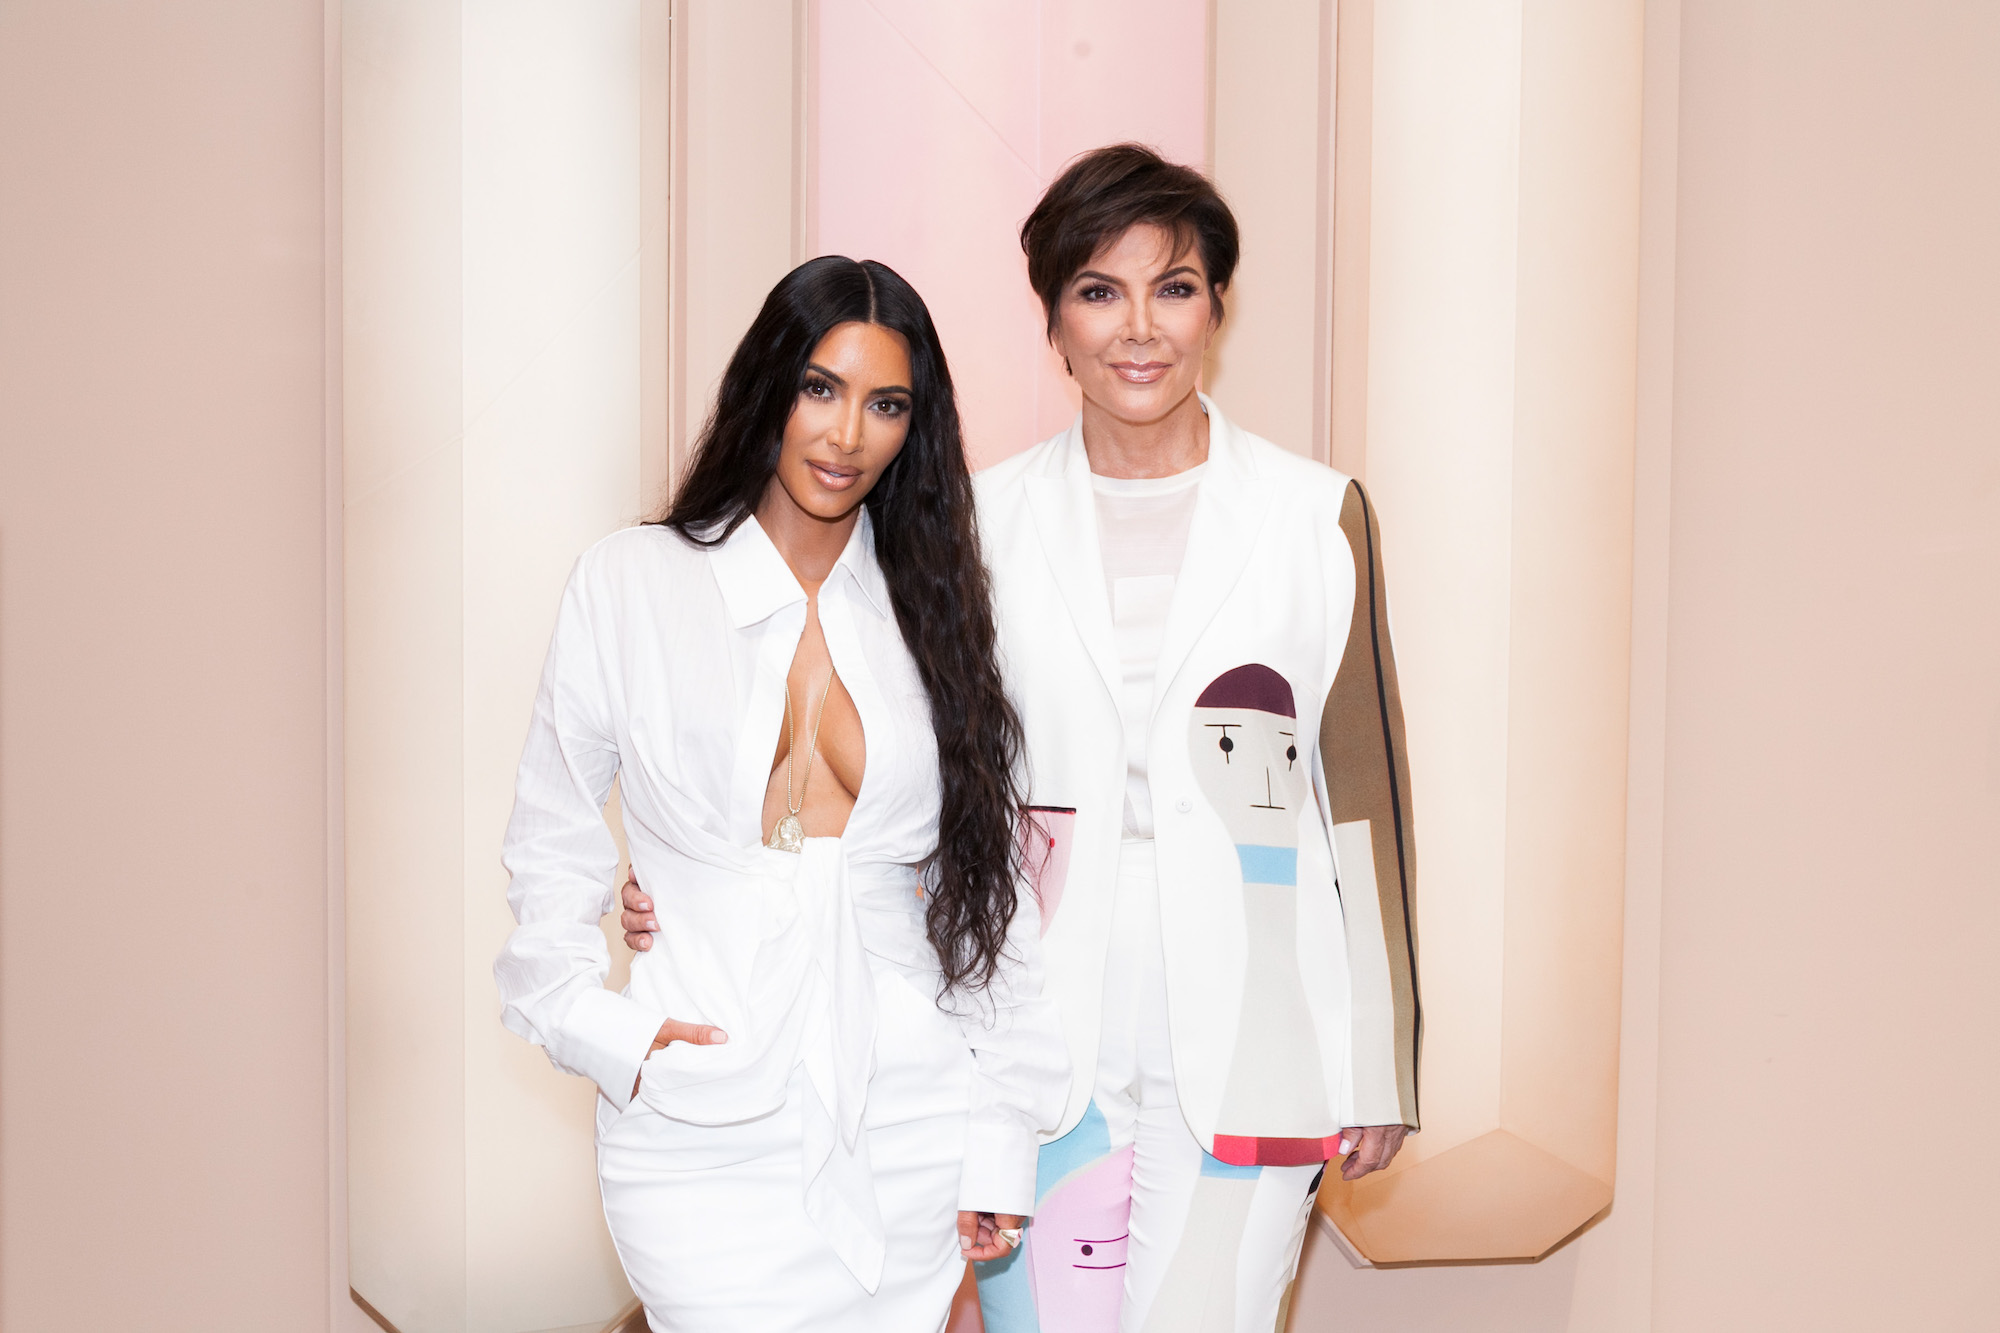 Kim Kardashian West and Kris Jenner smiling in front of a light pink background